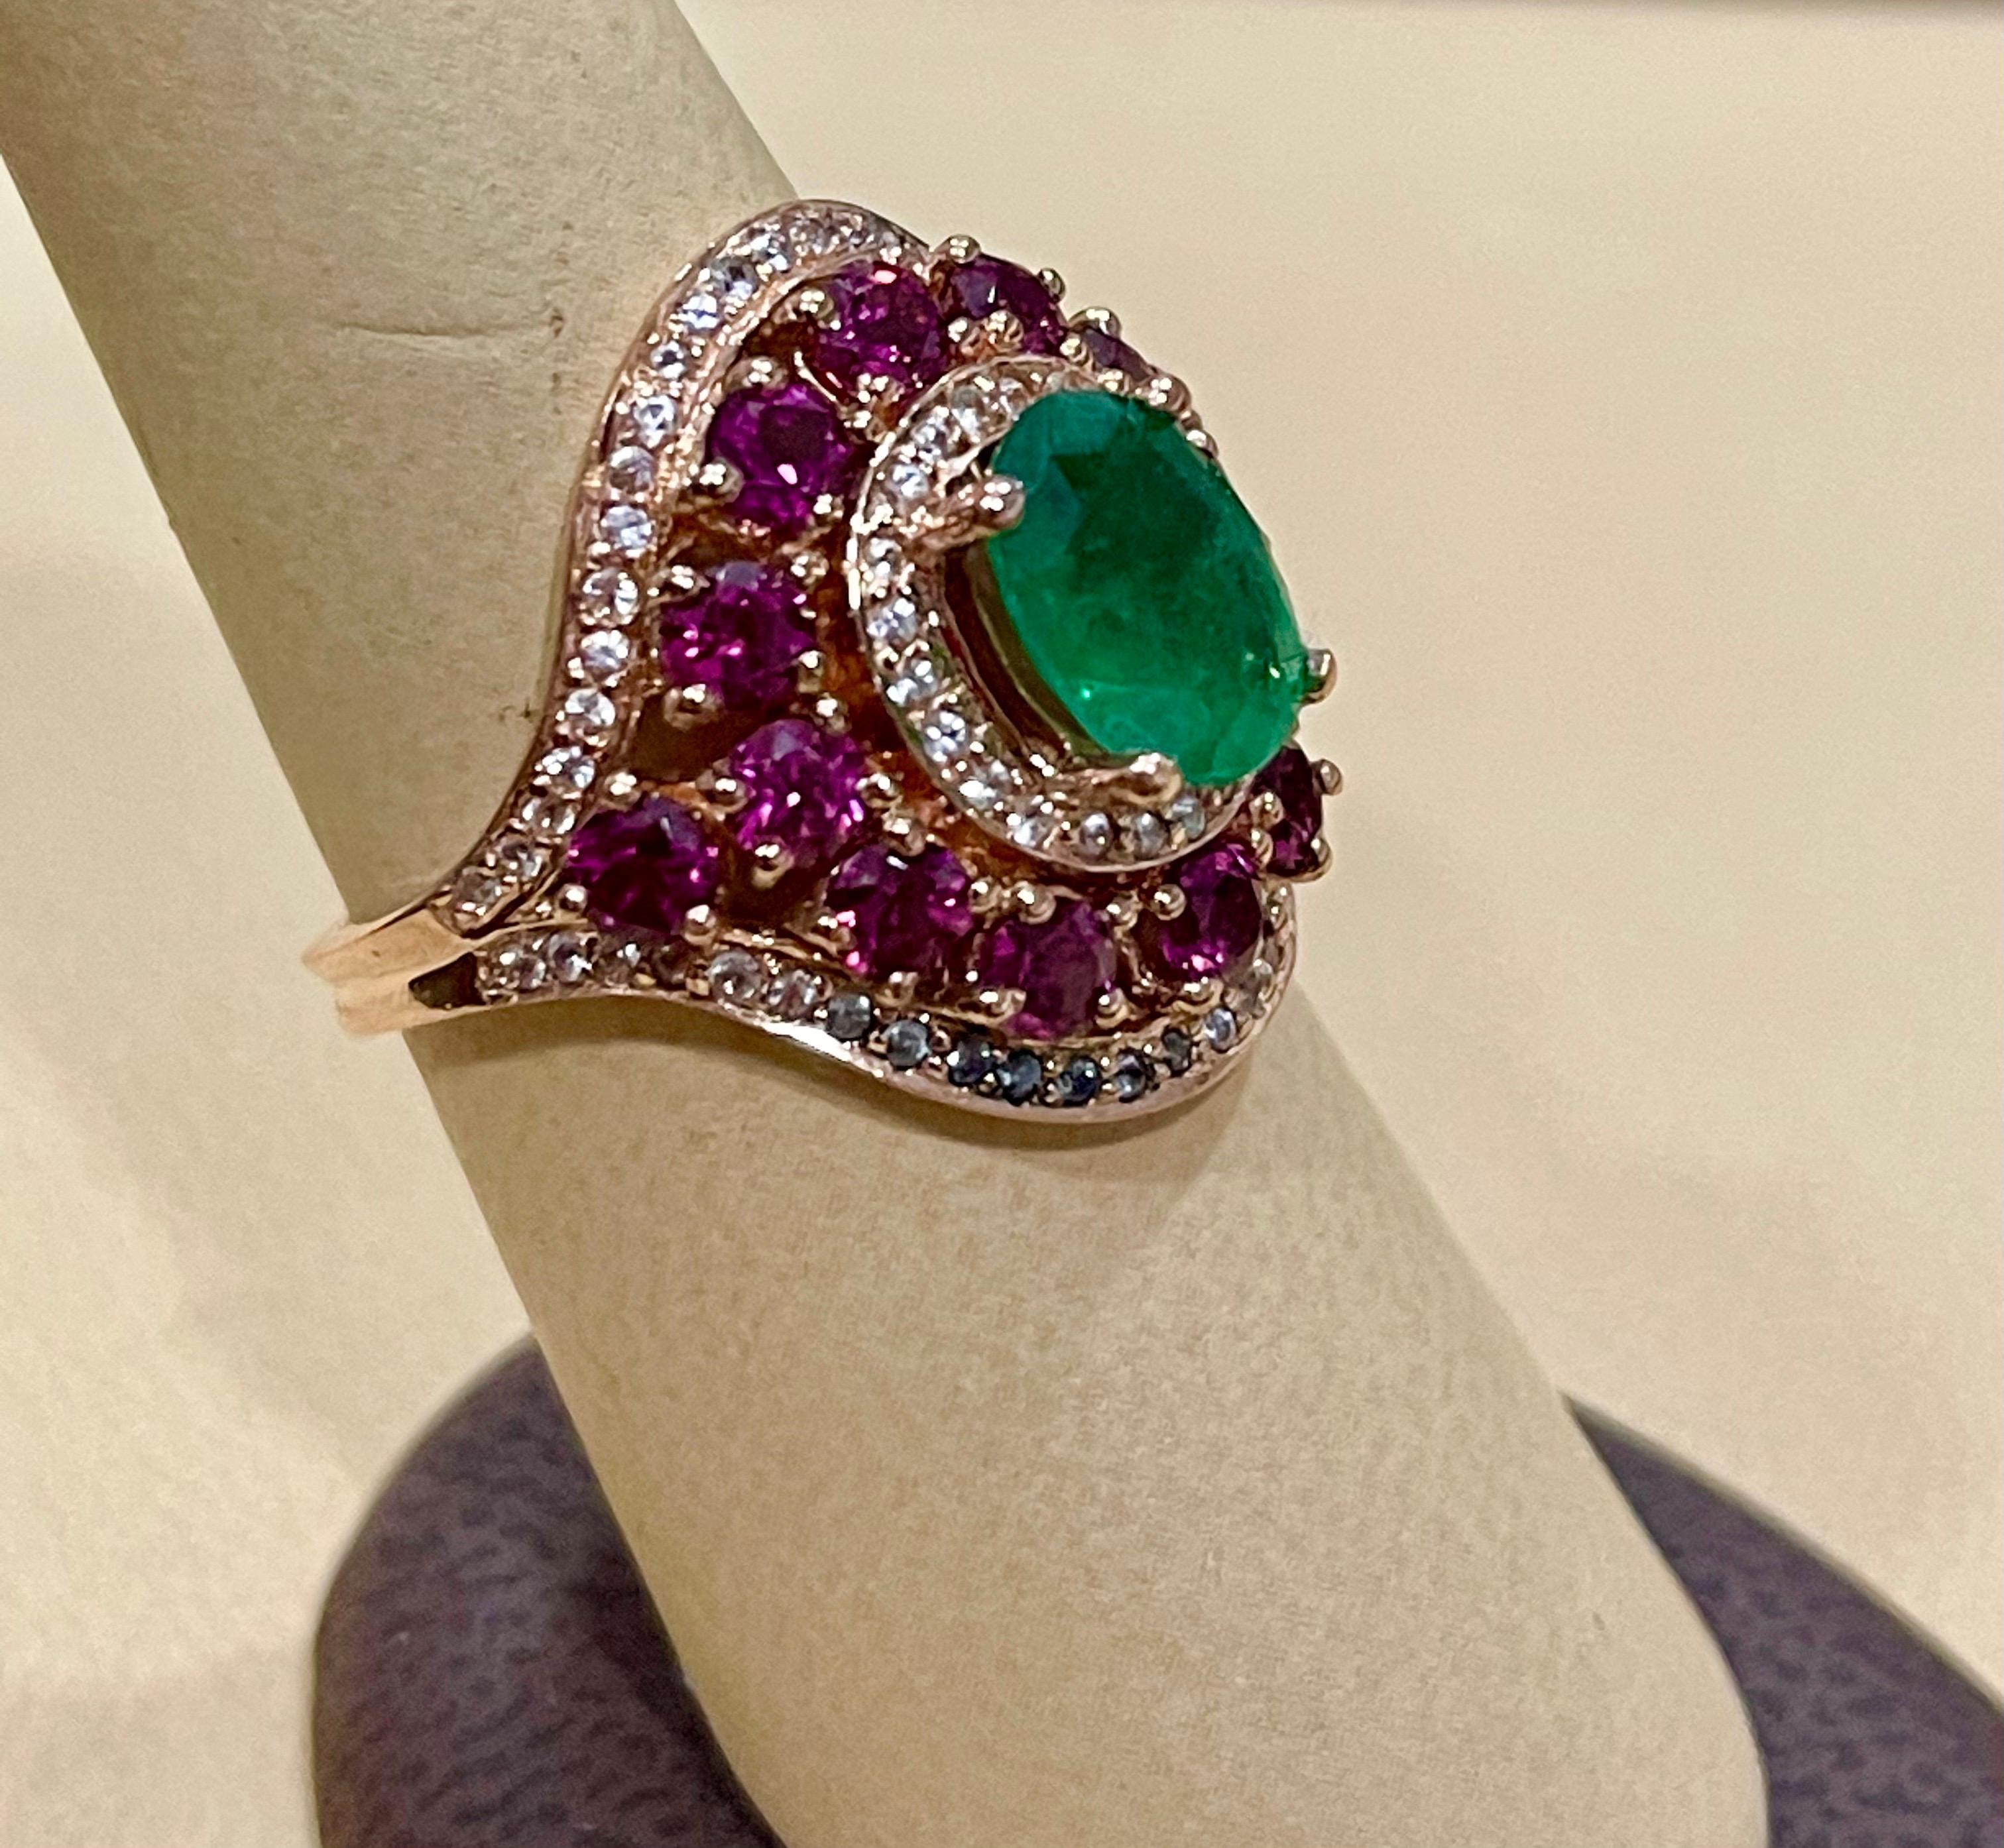 Emerald , Rubellite & Diamond Cocktail Ring in 14 Karat Rose Gold Size 8
Approximately 2 ct Oval Emerald of fine quality with excellent color and brilliance.
Round Brilliant cut diamonds are surrounding the center stone emerald.
The next row is made